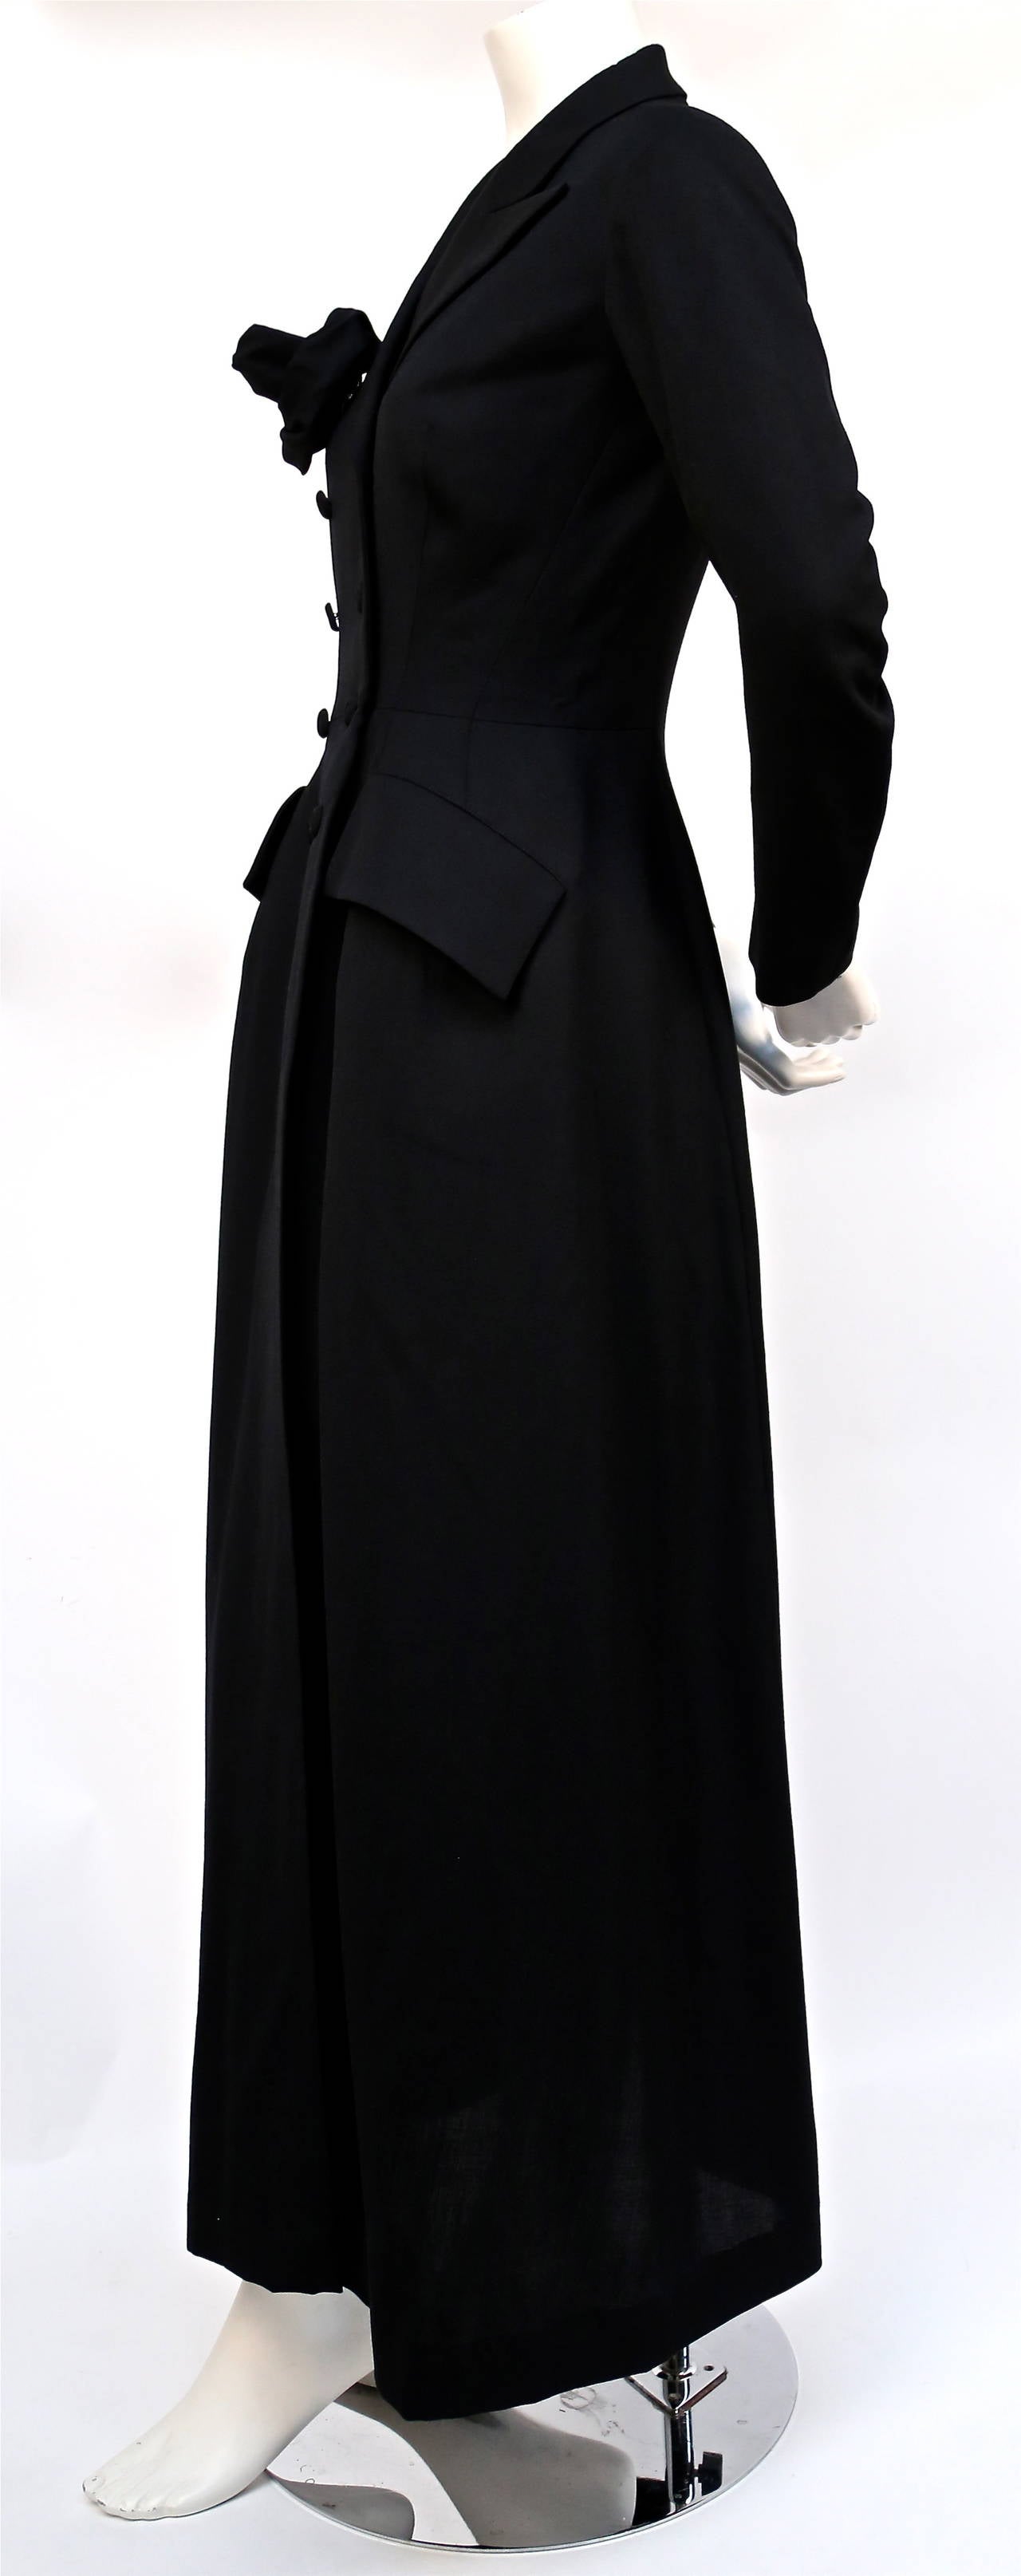 Very dramatic, jet black, floor length fitted dress coat from Yohji Yamamoto dating to the 1980's. Removable matching fabric 'rose' brooch. Labeled a size XS. Approximate measurements: shoulders 16